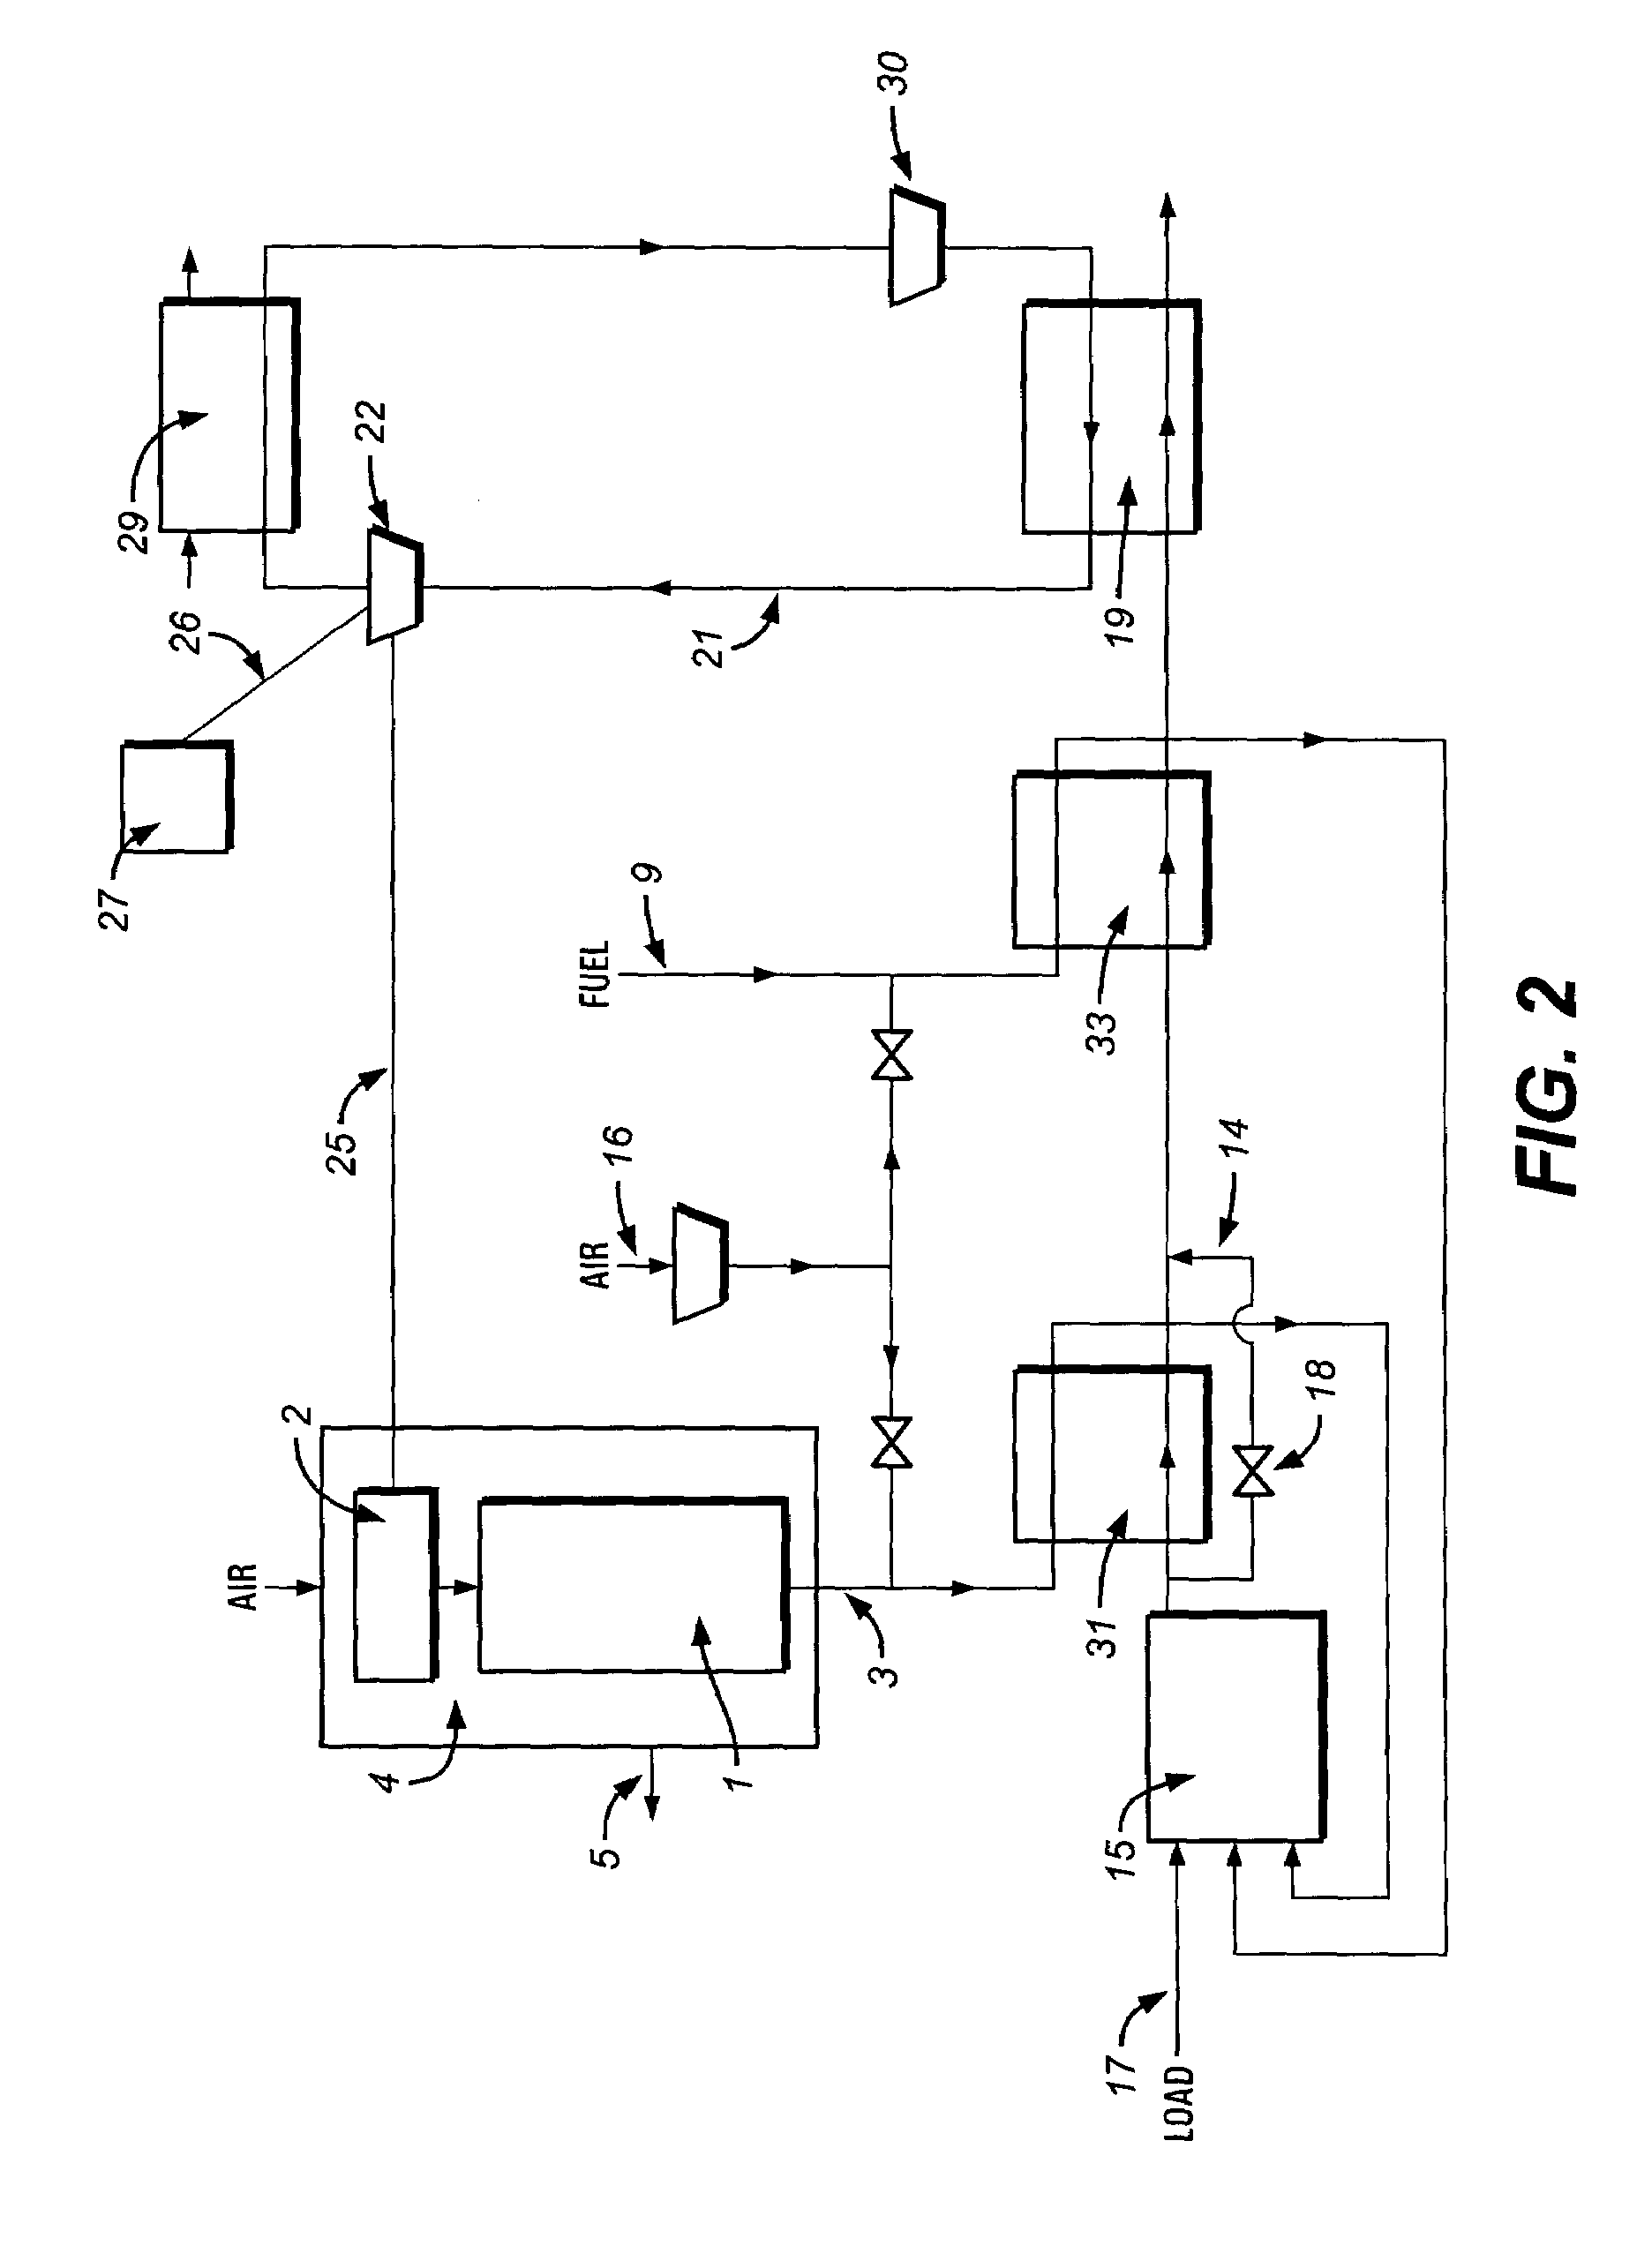 Integrated heat recovery systems and methods for increasing the efficiency of an oxygen-fired furnace